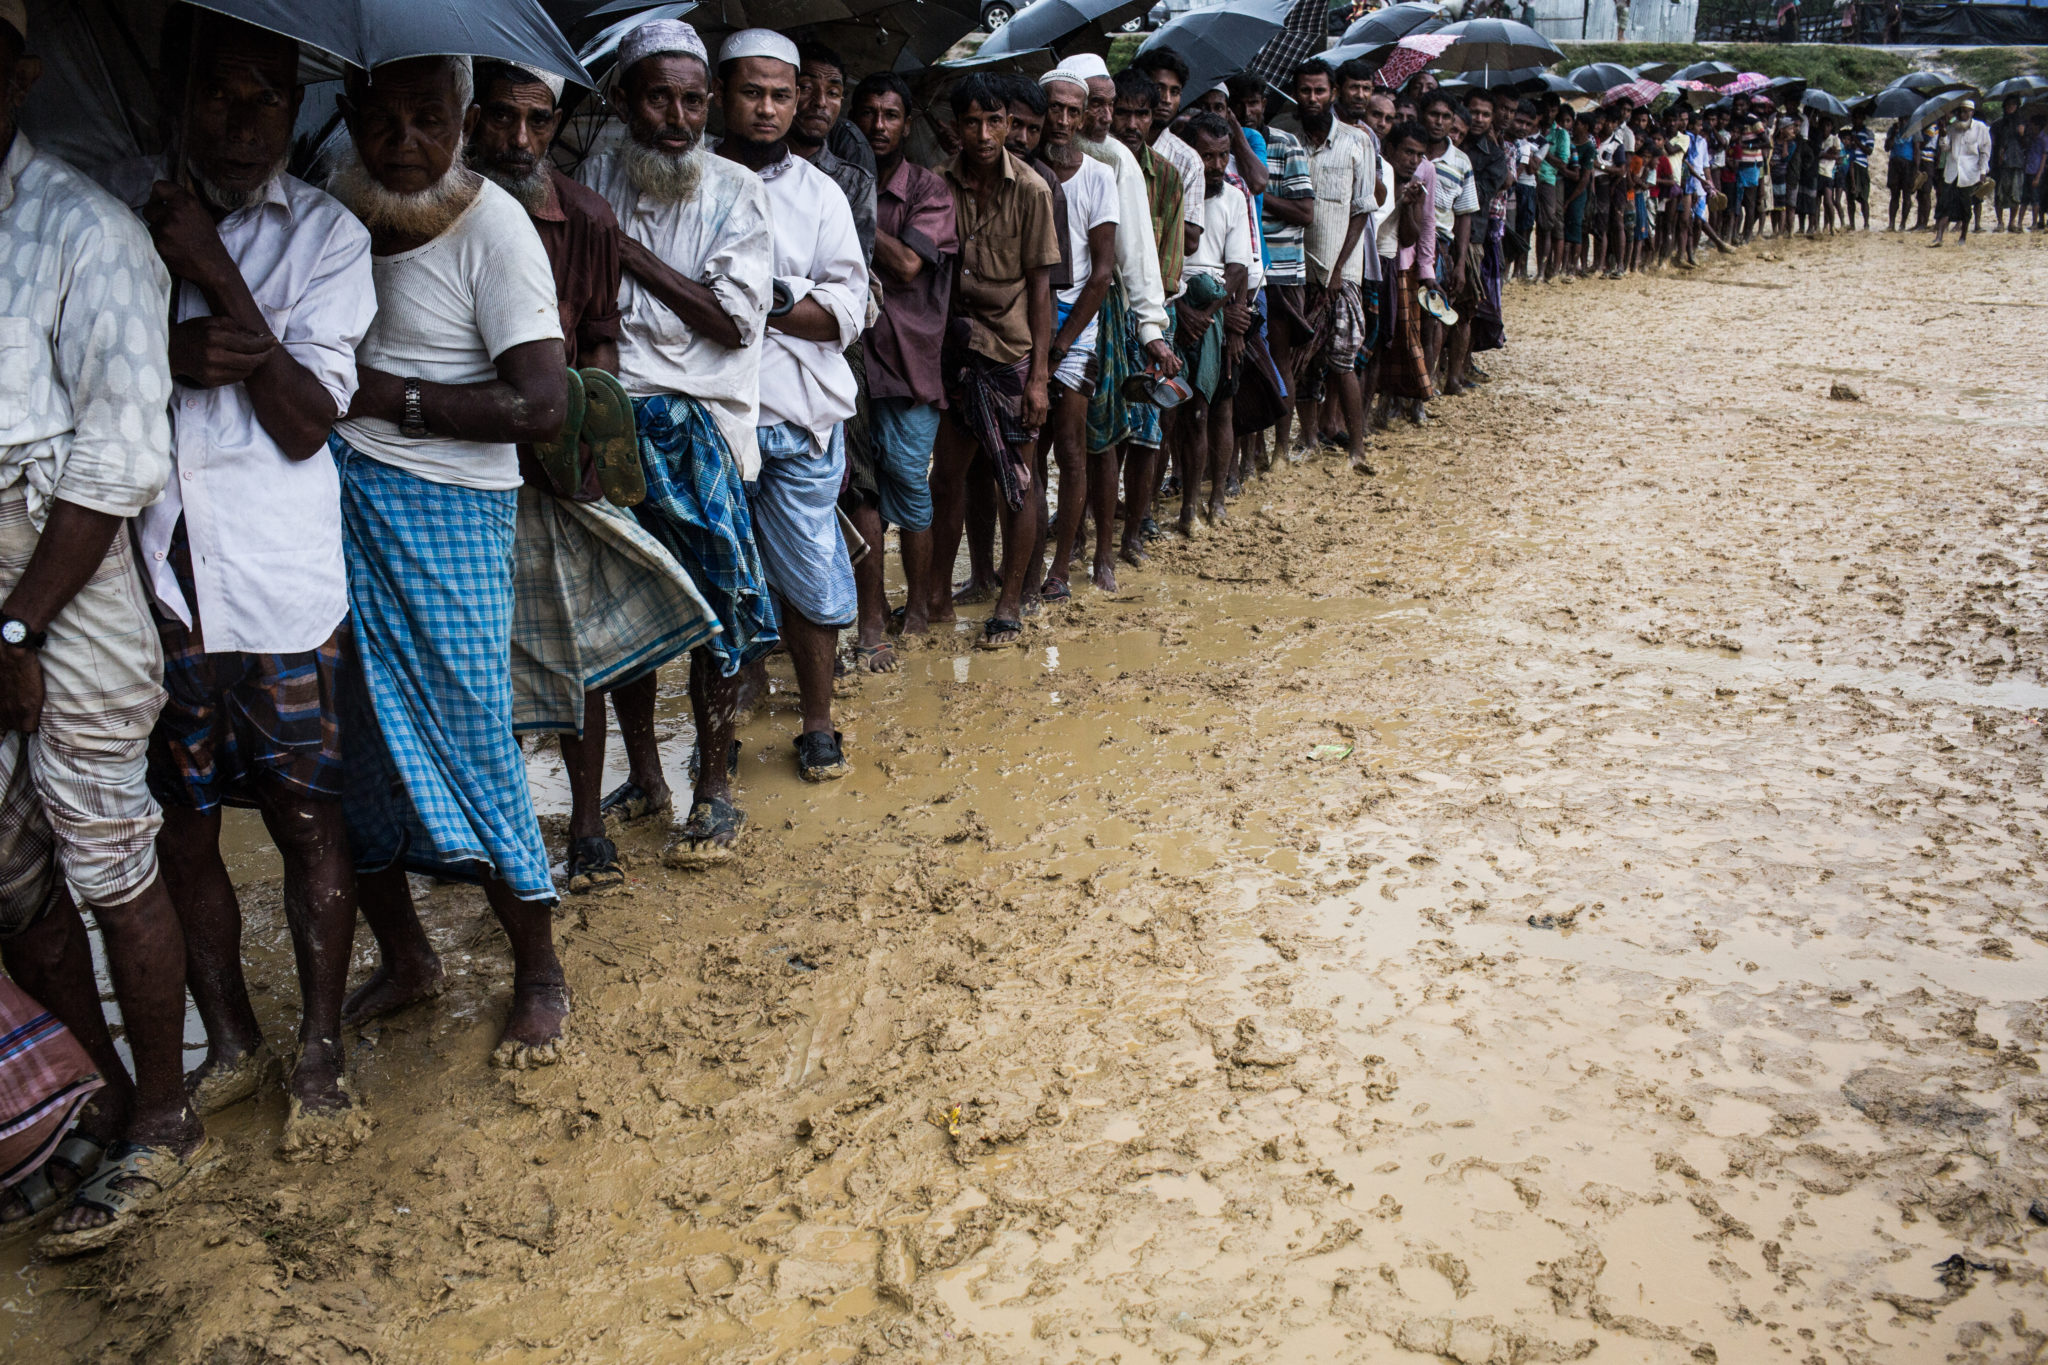 Myanmar: Military attempts to whitewash crimes against humanity targeting Rohingya